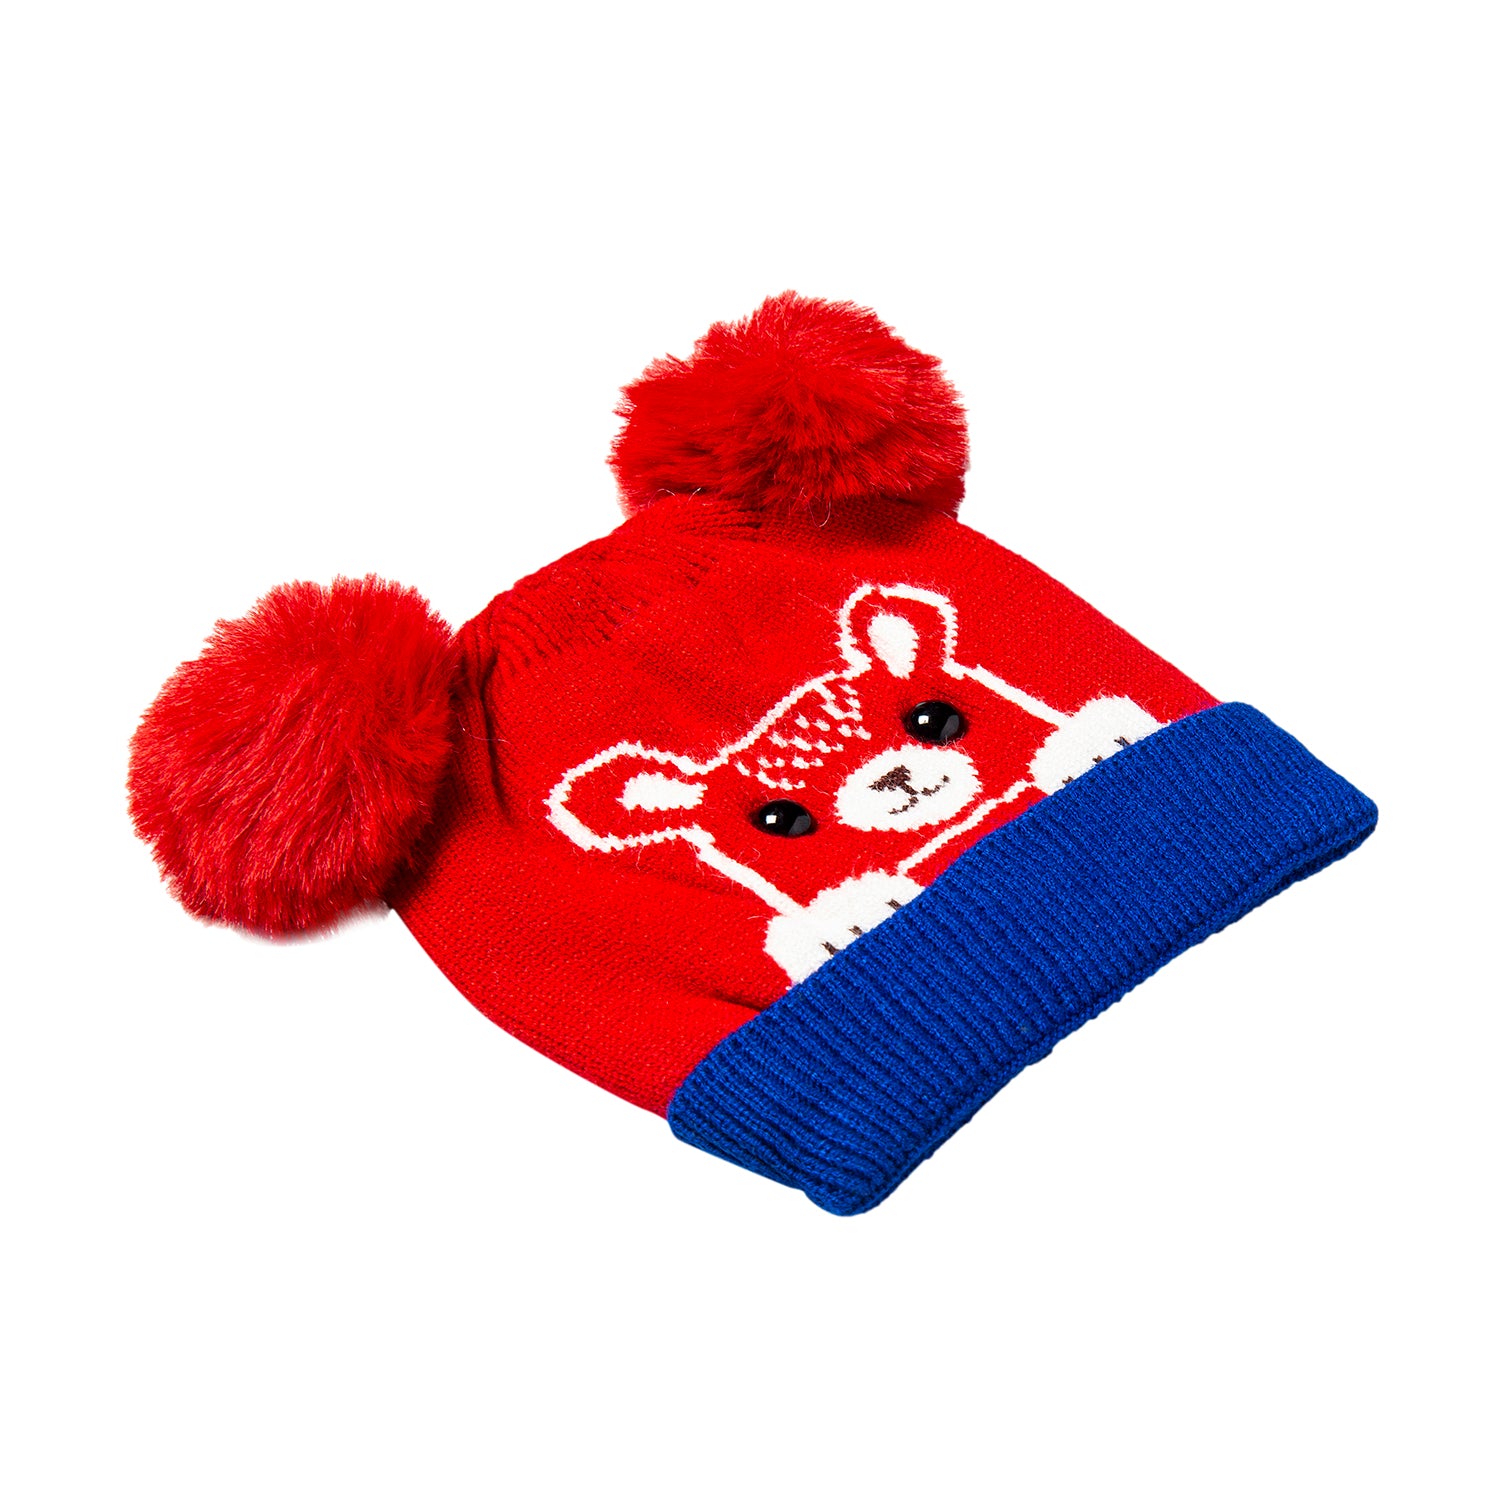 Knit Woollen Cap Pom Pom Bear Red And Blue - Baby Moo